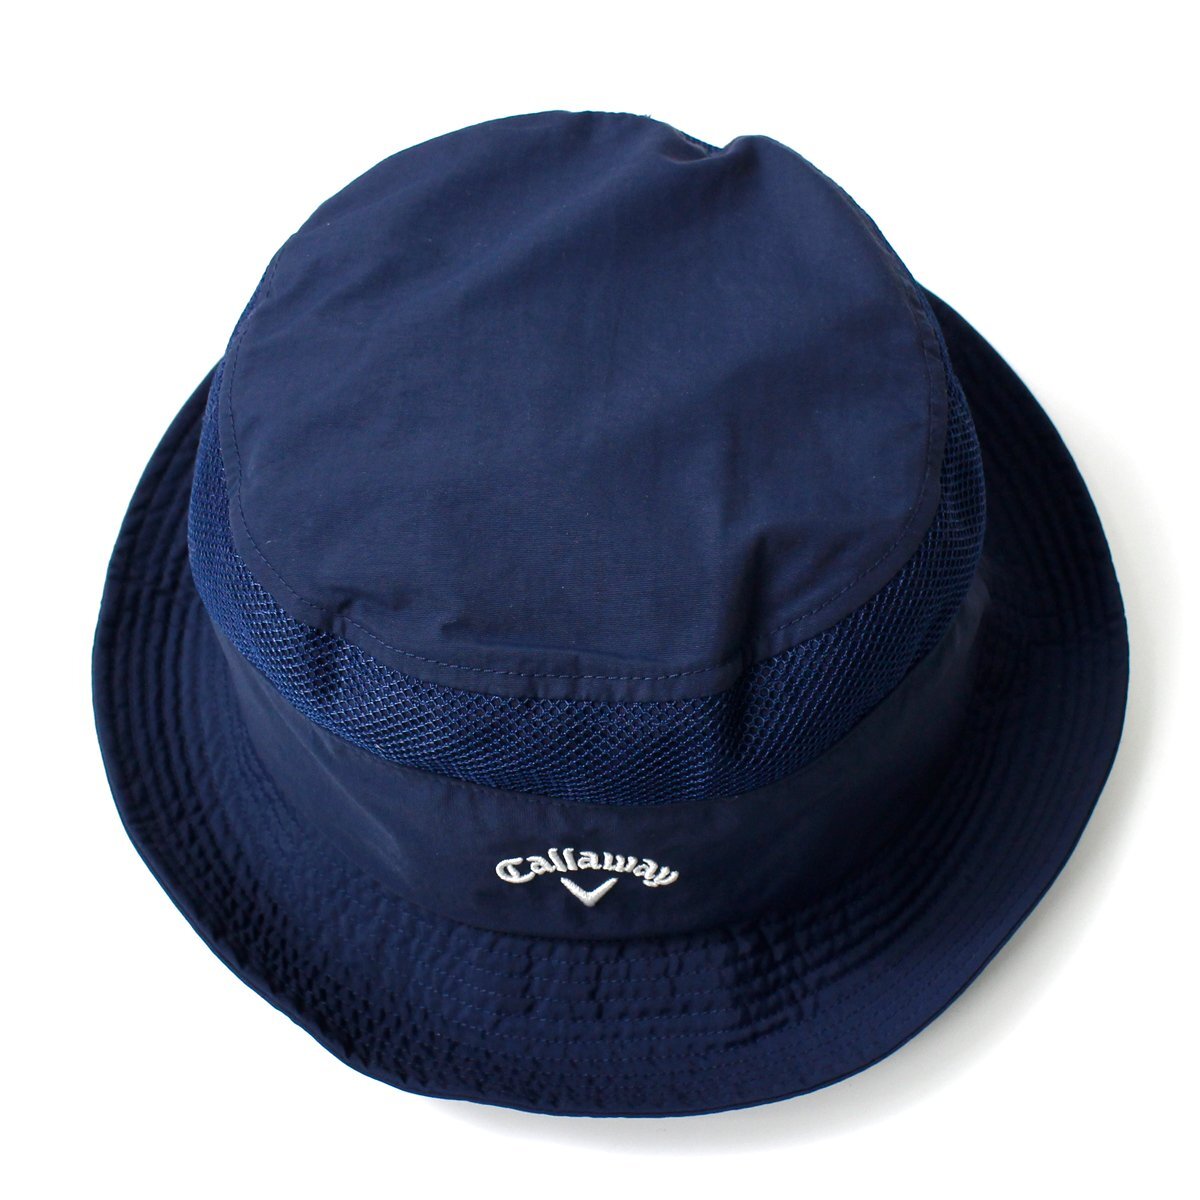  new goods Callaway Golf . sweat speed . bucket hat size free Callaway hat Logo embroidery small articles men's navy blue navy *CN1942